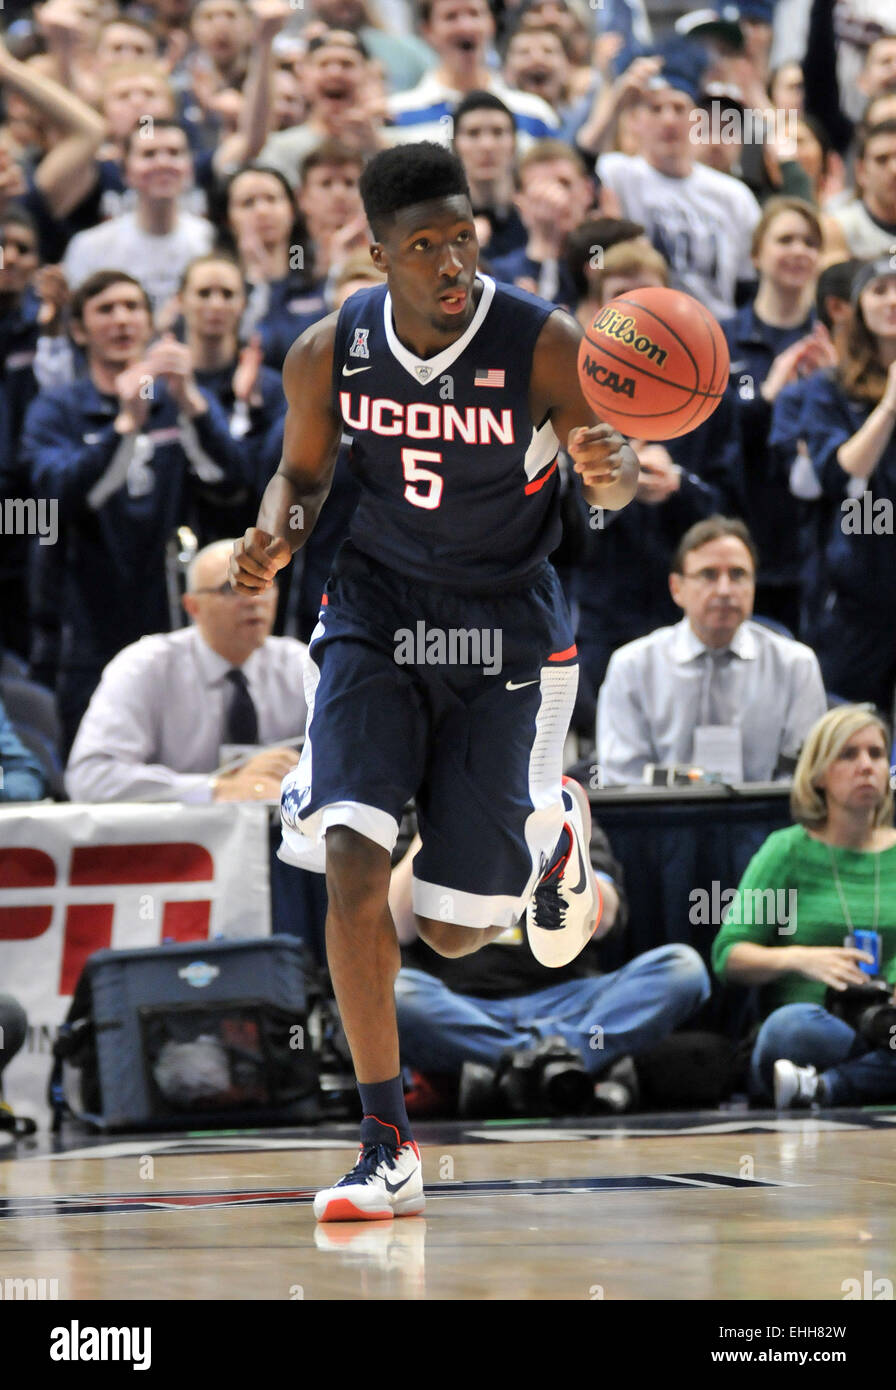 March 13th 2015: Daniel Hamilton(5) of Uconn in action during the NCAA American Conference Tournament Basketball game between the Cincinnati Bearcats and the Connecticut Huskies at The XL Center in Hartford, CT. Gregory Vasil/CSM Stock Photo